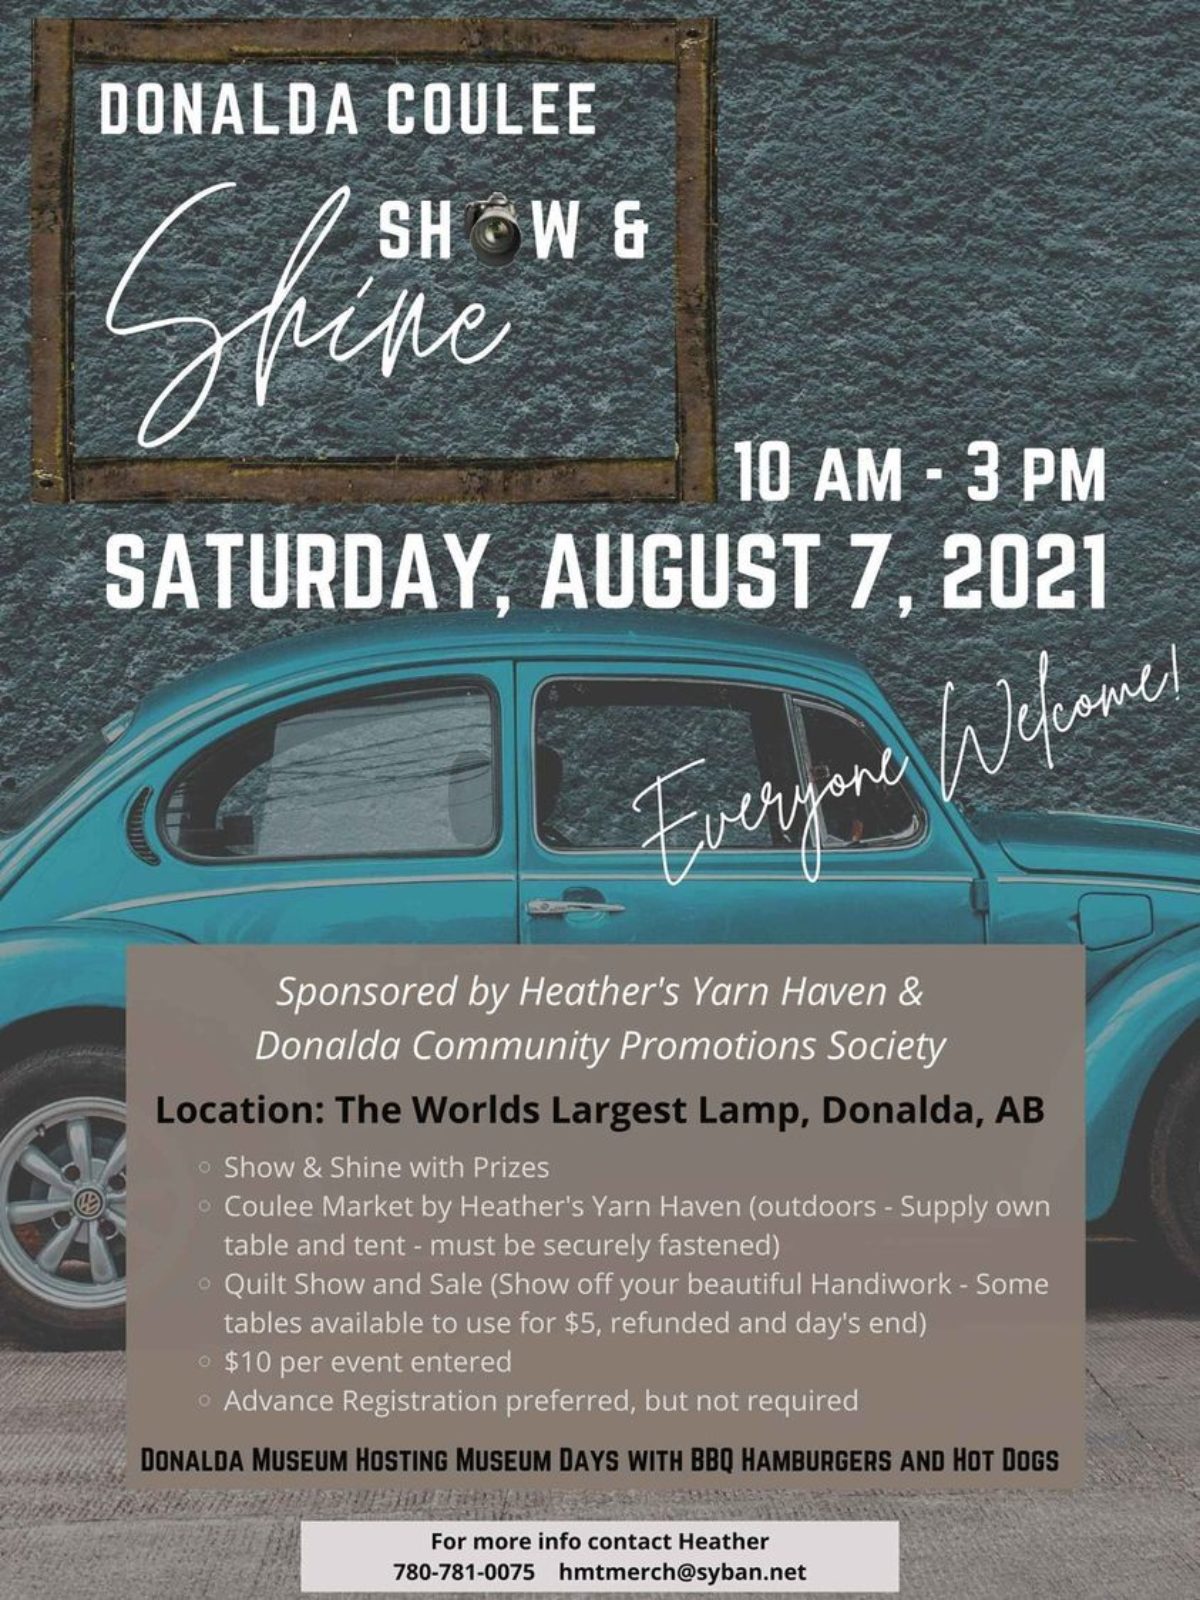 Donalda coulee show and shine